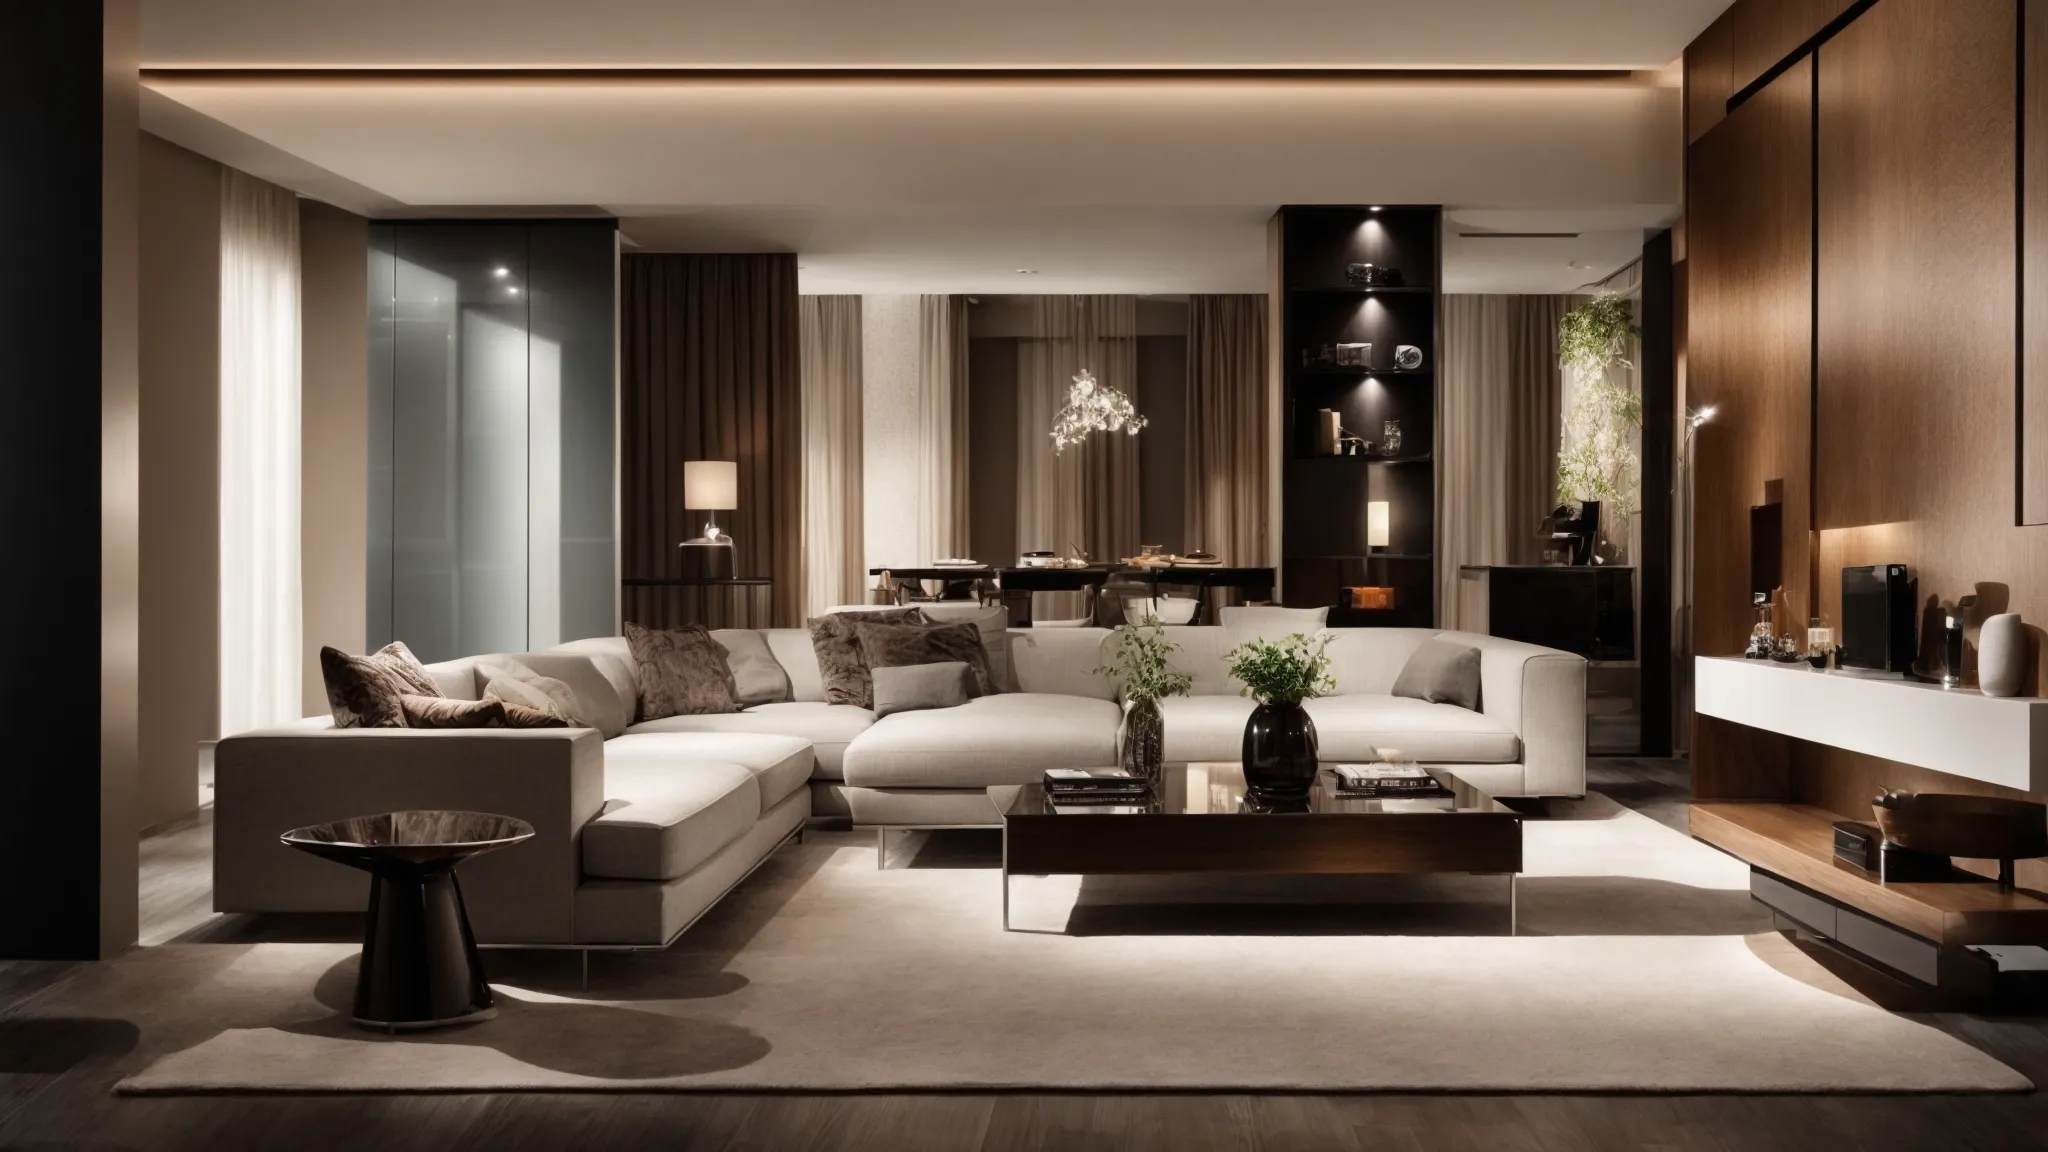 a sleek, modern living room with polished surfaces and contemporary furniture arranged meticulously under soft, elegant lighting.